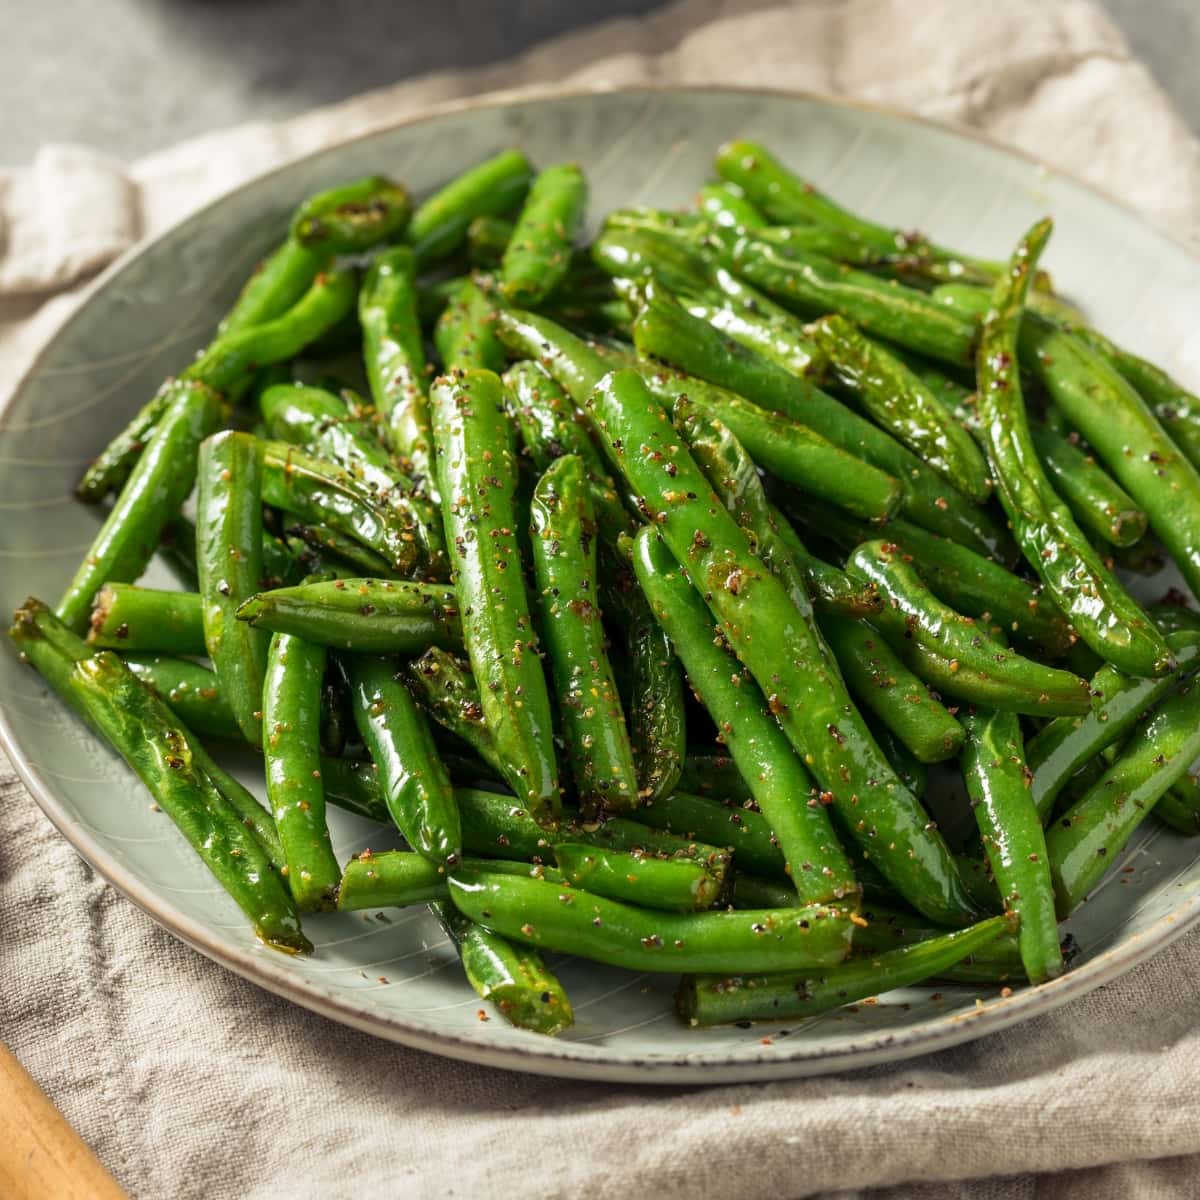 Dish of Green Beans Steamed in the Microwave, seasoned with Salt and Cracked Black Pepper